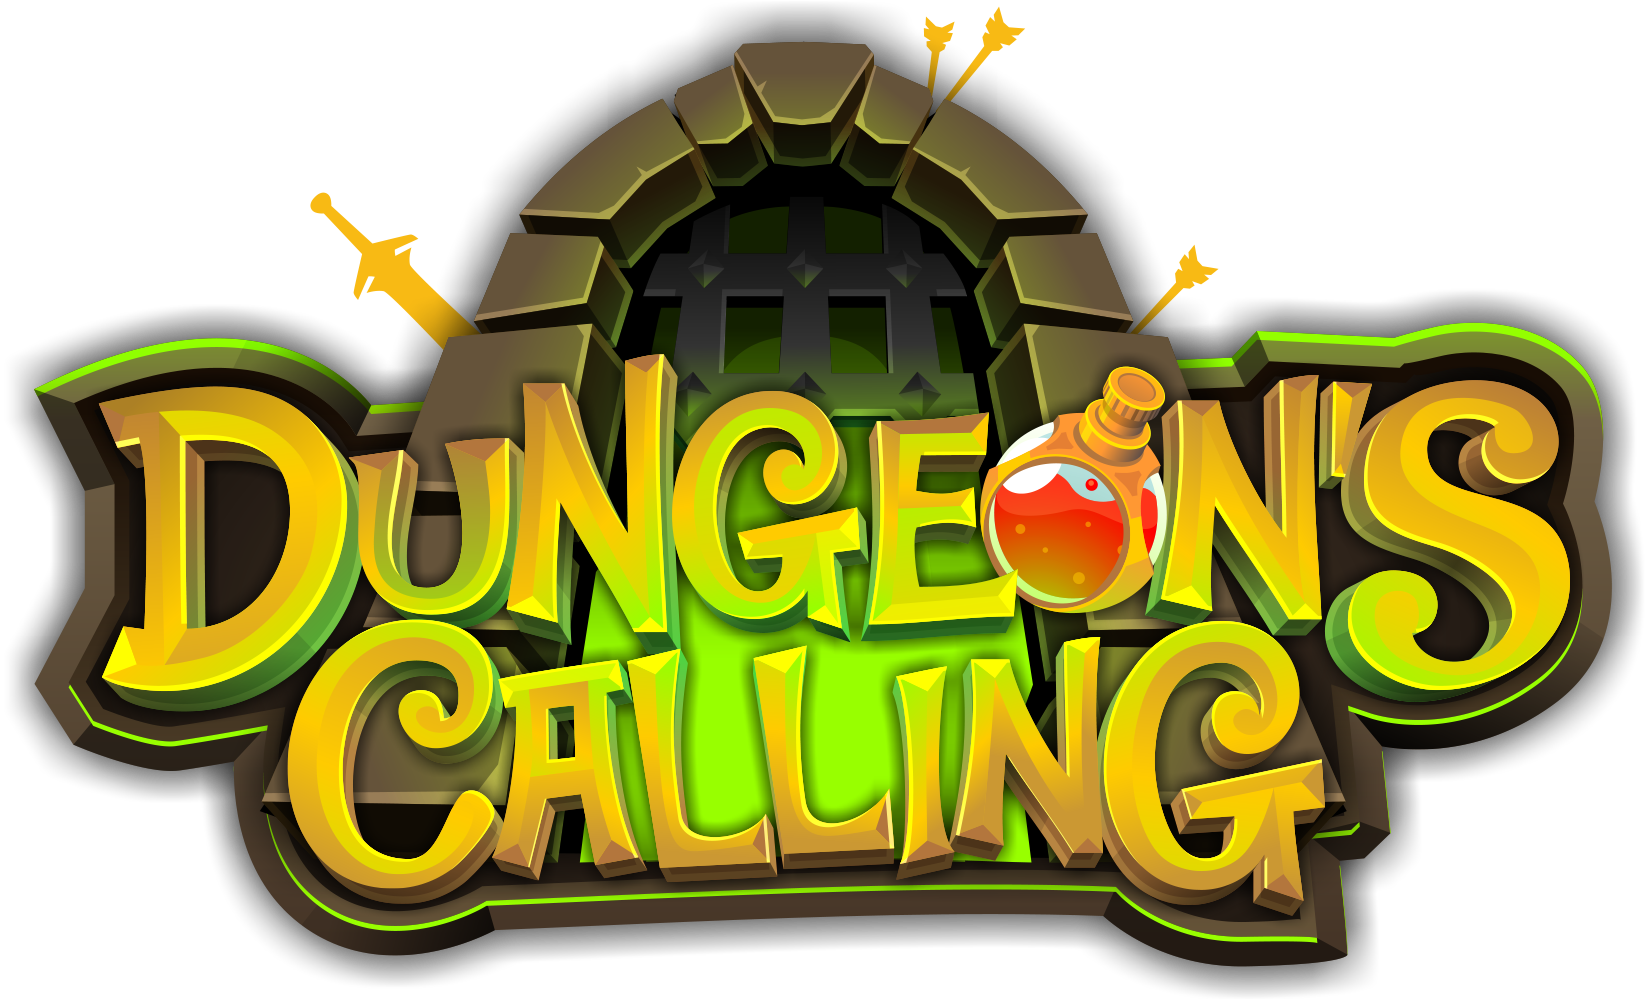 Dungeon's Calling